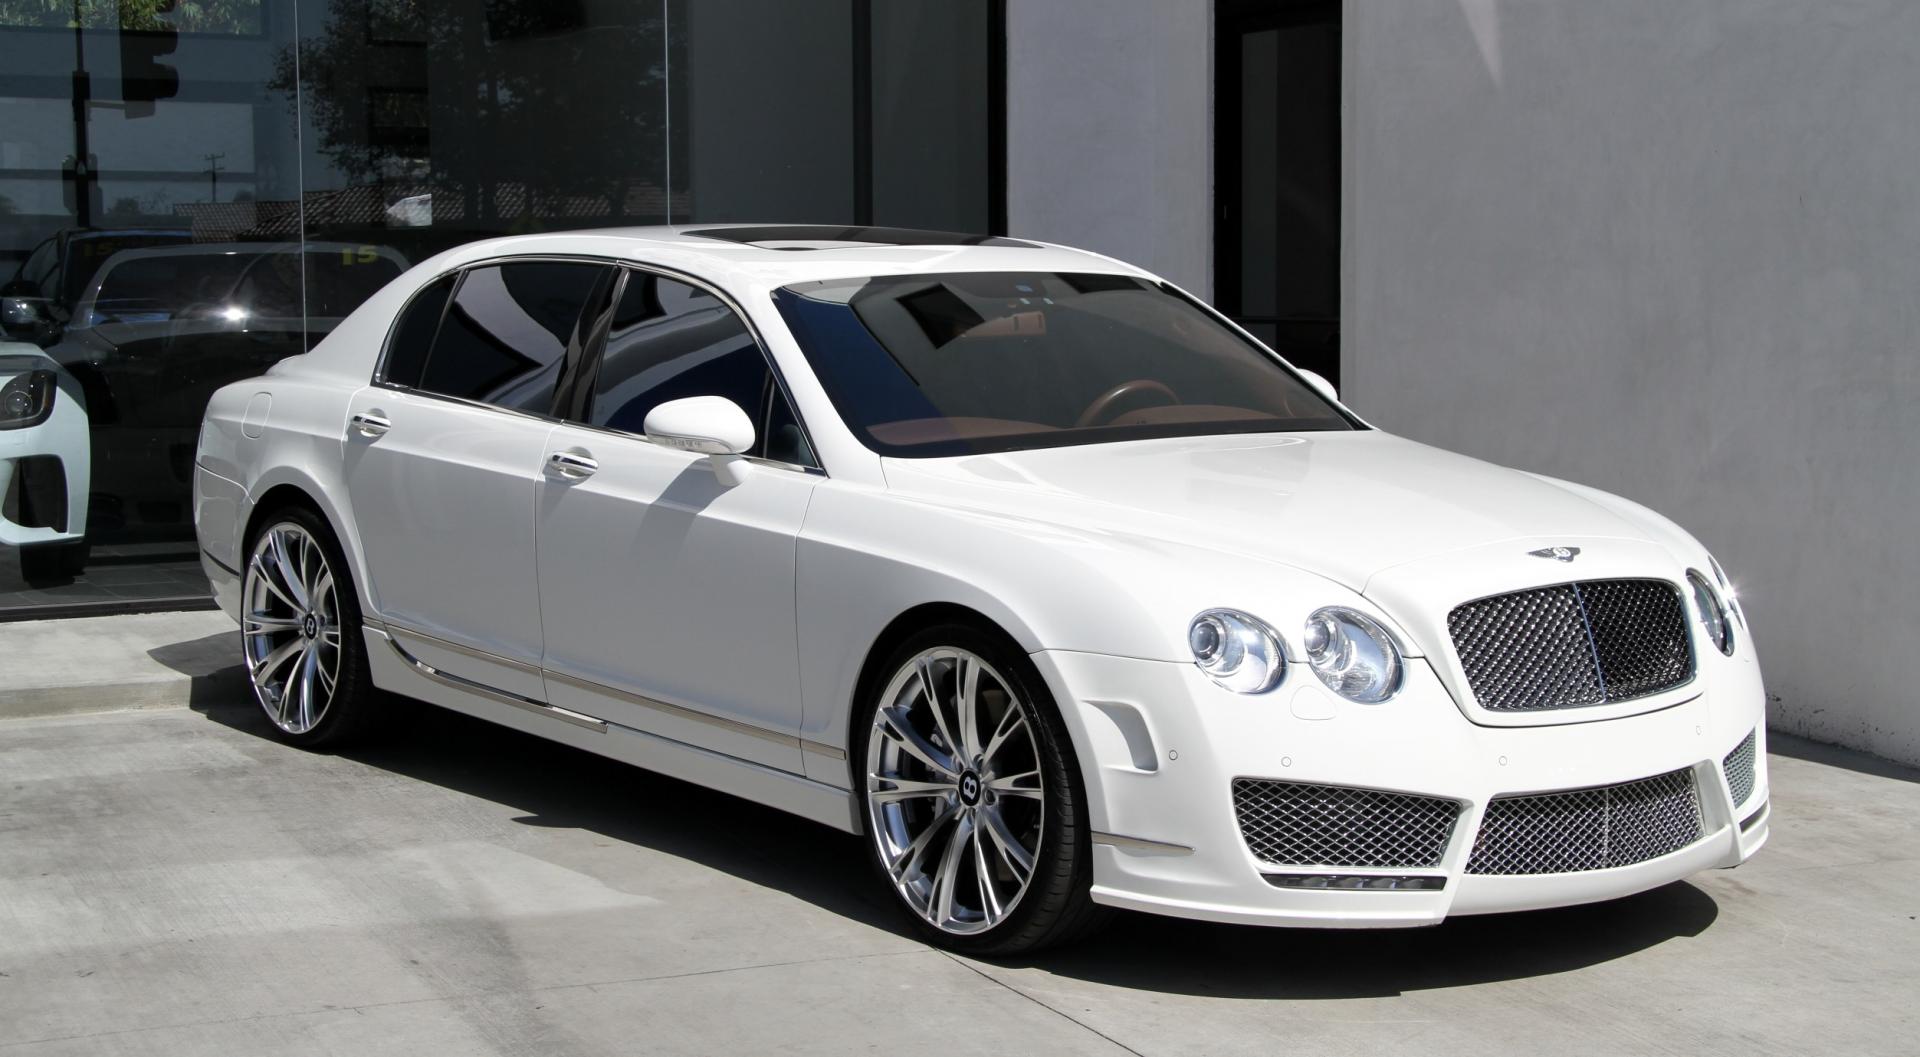 2009 Bentley Continental Flying Spur Speed ** MANSORY EDITION ** Stock #  5874A for sale near Redondo Beach, CA | CA Bentley Dealer